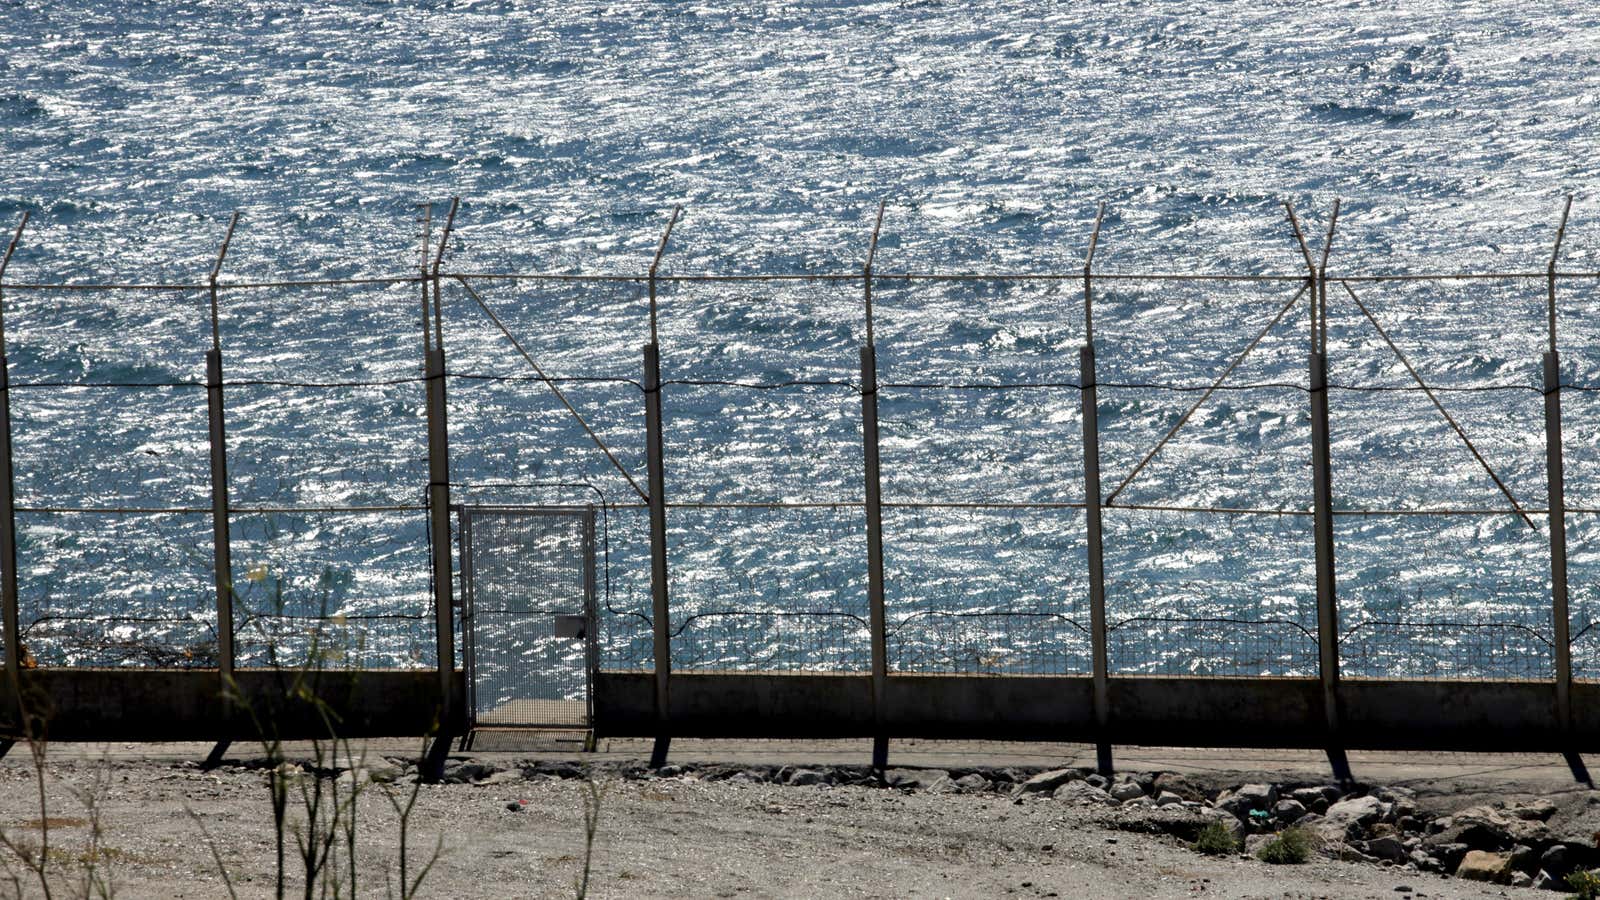 Formidable fences guard the border of the Spanish enclave of Ceuta.